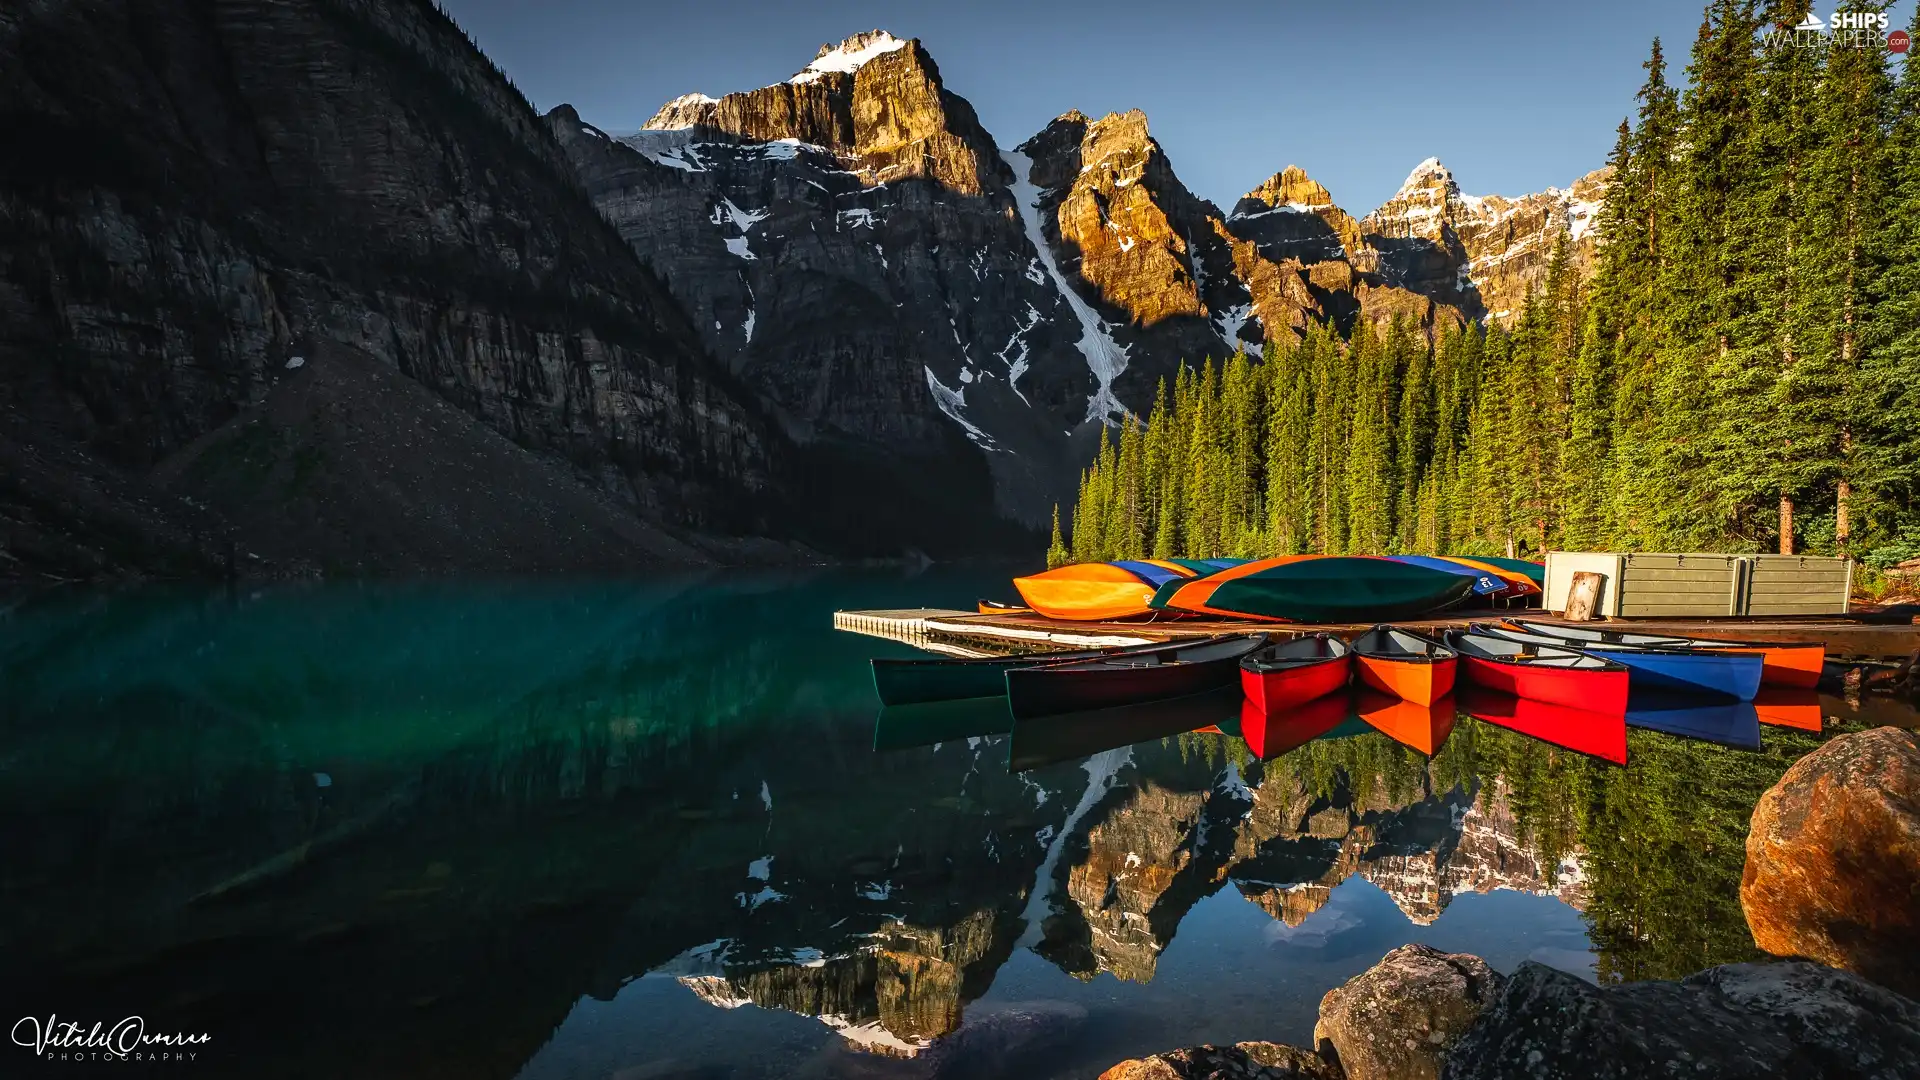 Kayaks, lake, trees, forest, Mountains, Canada, Province of Alberta, Platform, Moraine Lake, Banff National Park, viewes